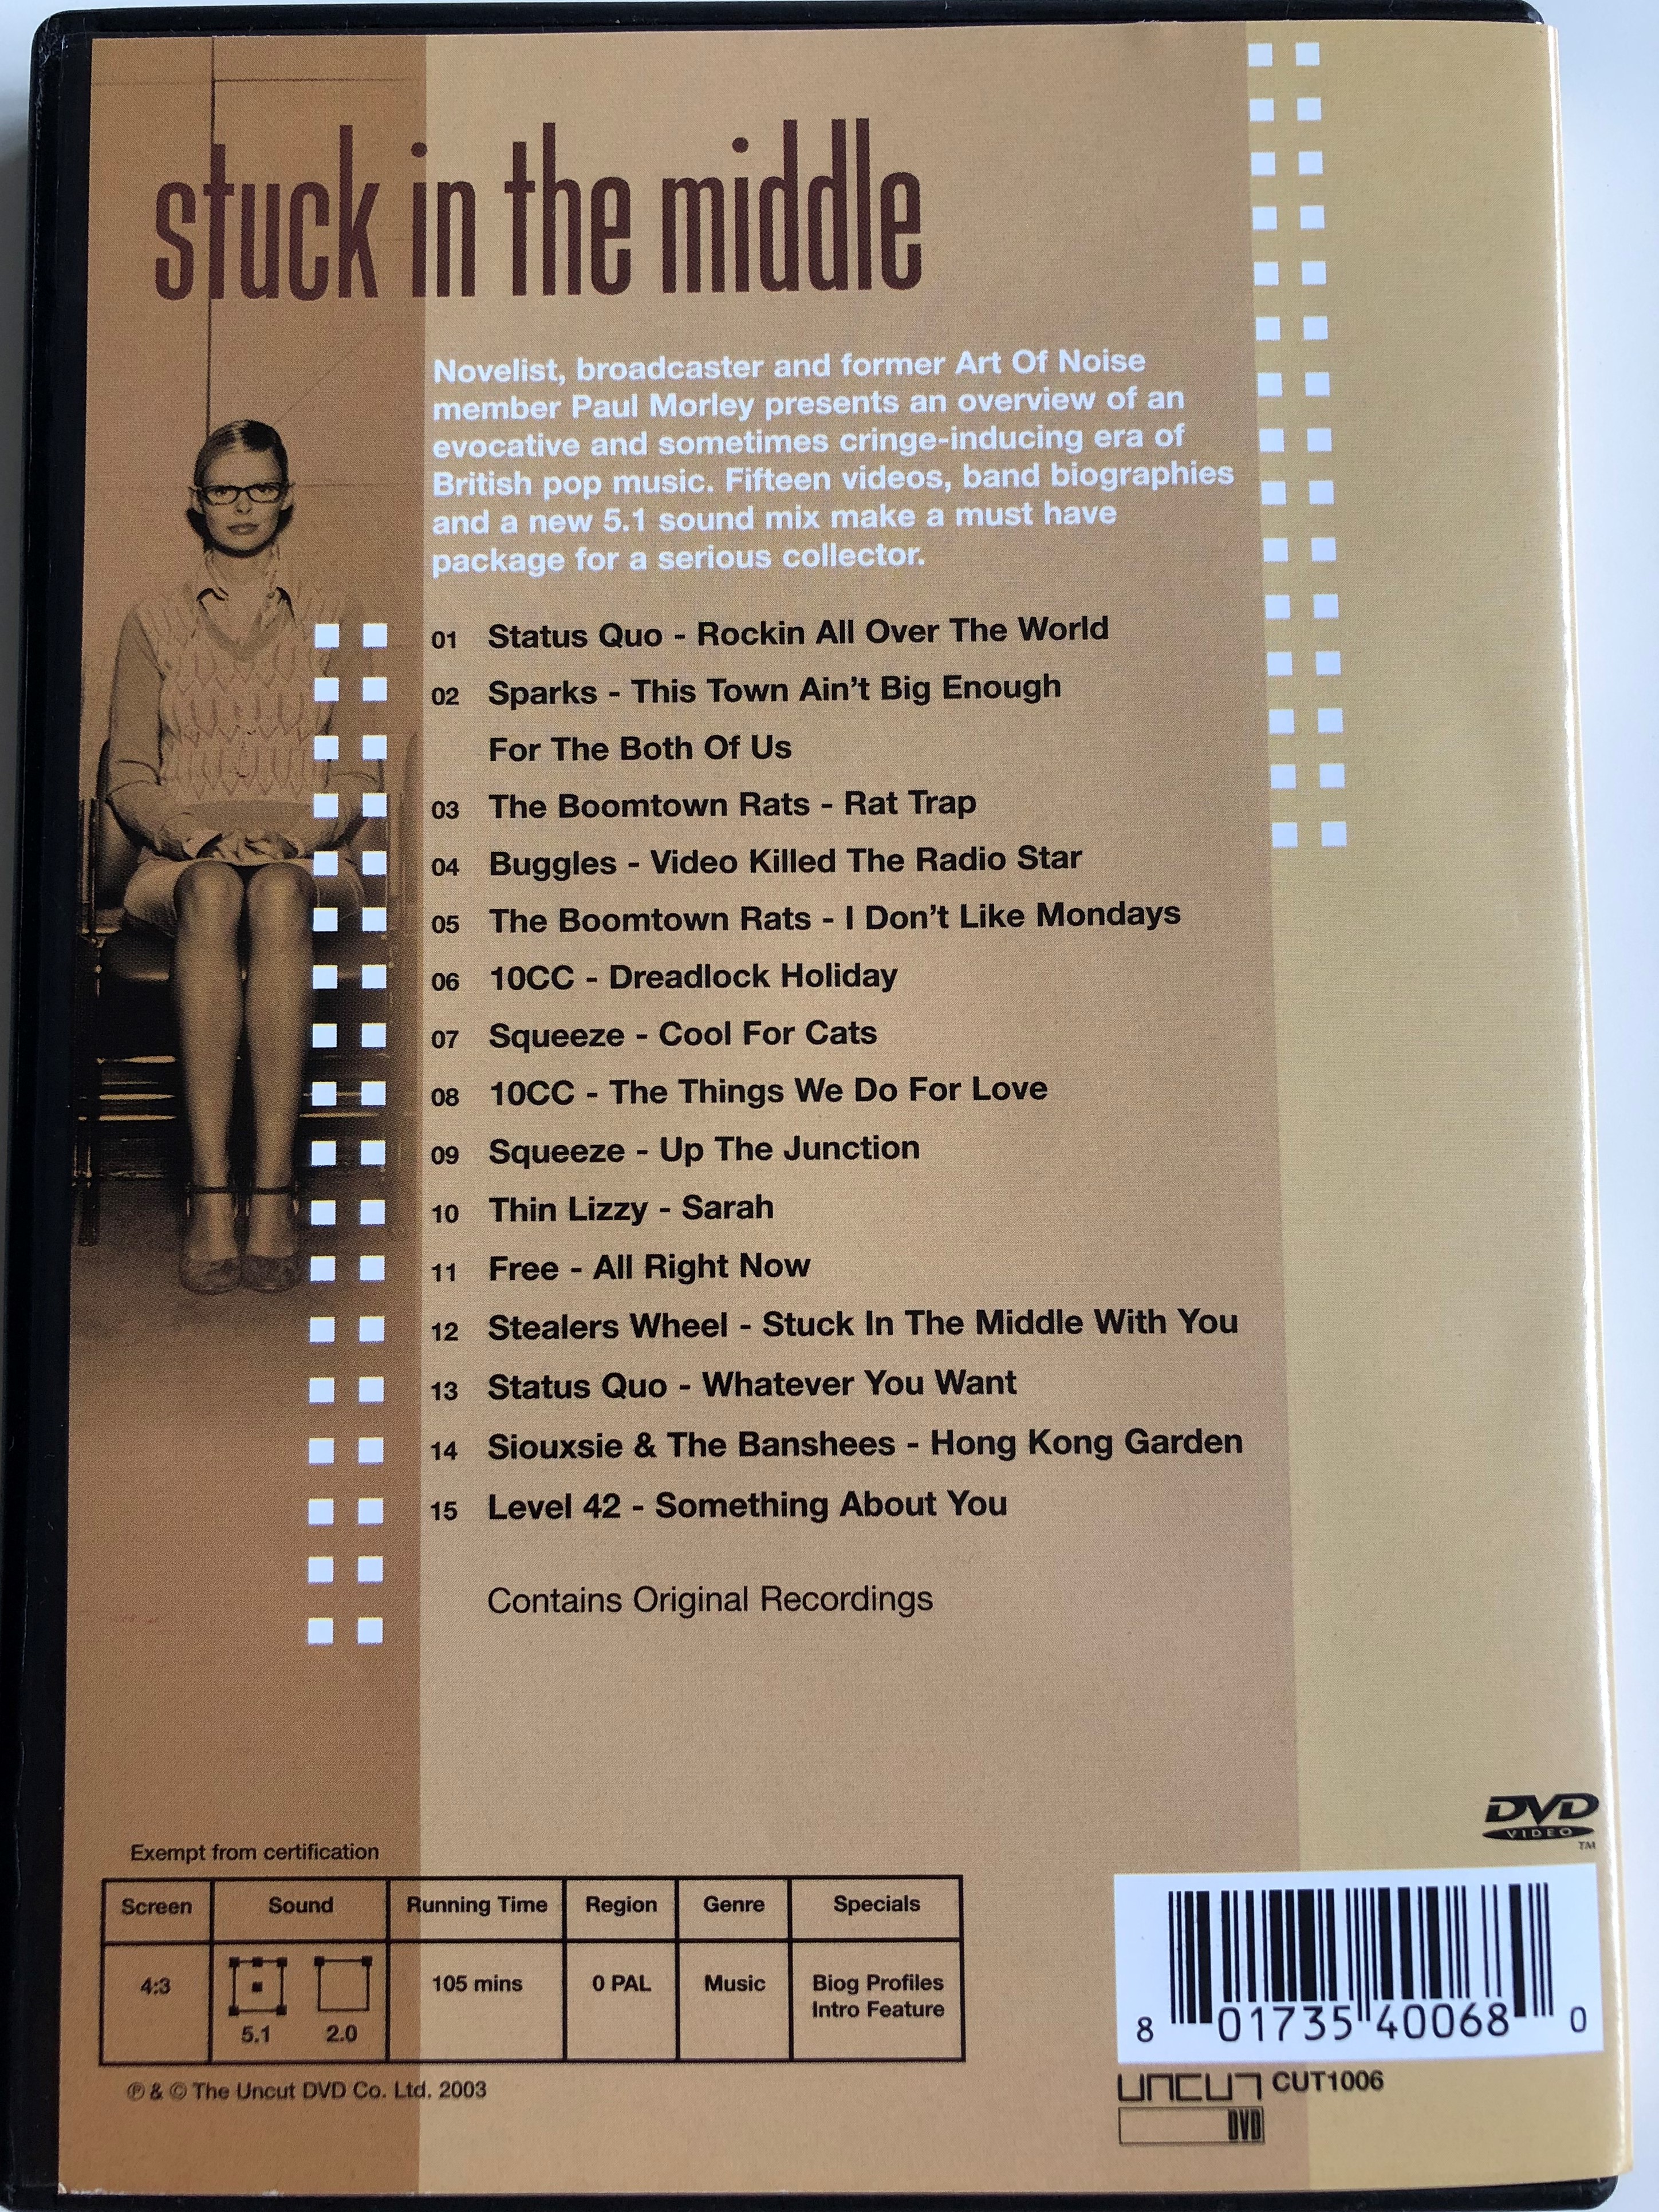 Stuck in the middle / 15 classic 70's videos on DVD / Contains original  recordings / Presented by Paul Morley - bibleinmylanguage